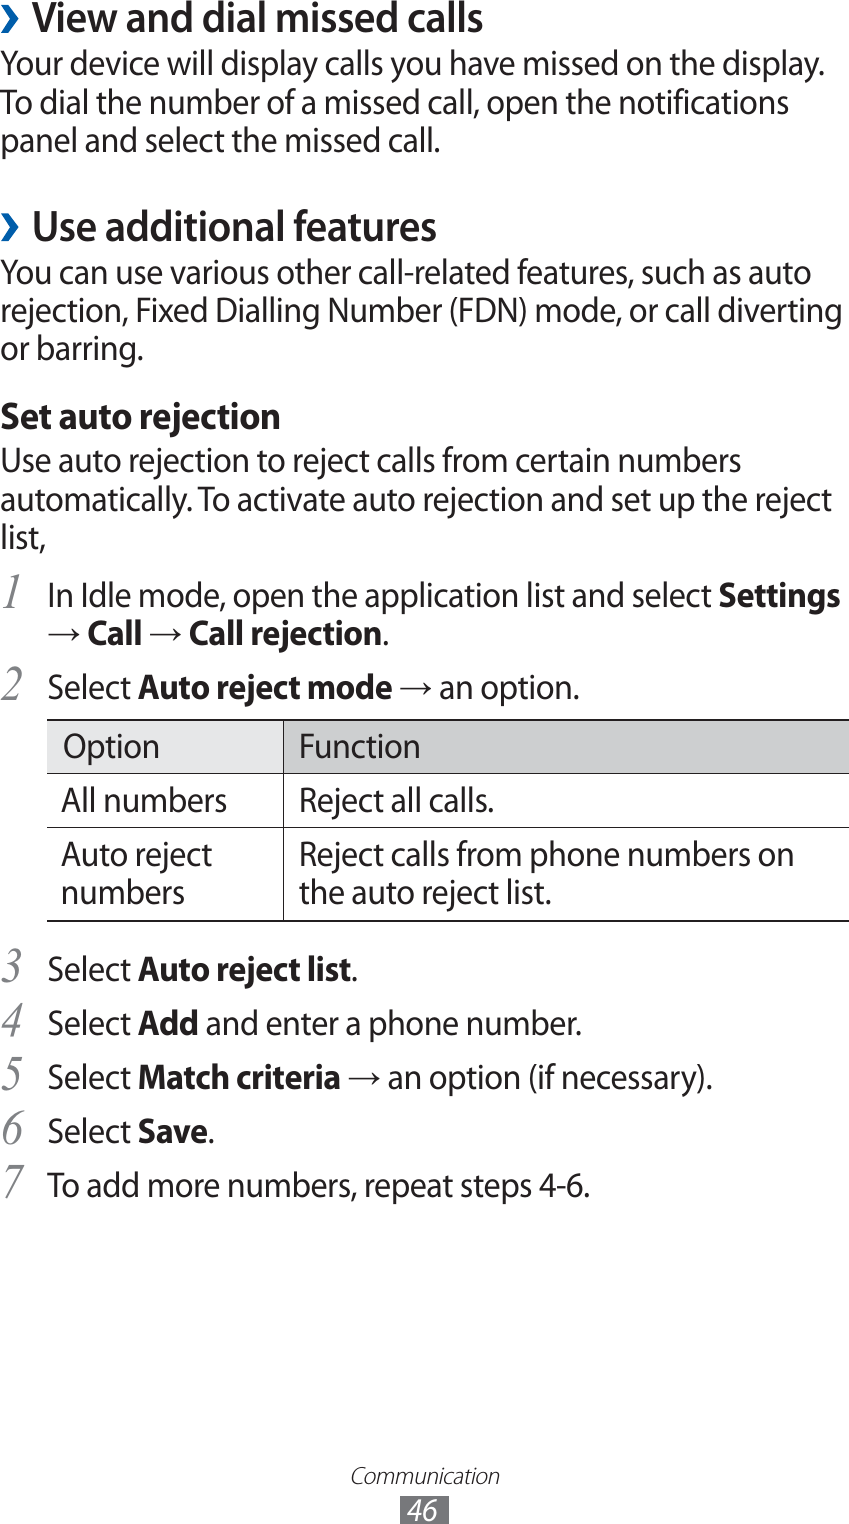 Communication46View and dial missed calls ›Your device will display calls you have missed on the display. To dial the number of a missed call, open the notifications panel and select the missed call.Use additional features ›You can use various other call-related features, such as auto rejection, Fixed Dialling Number (FDN) mode, or call diverting or barring.Set auto rejectionUse auto rejection to reject calls from certain numbers automatically. To activate auto rejection and set up the reject list,In Idle mode, open the application list and select 1 Settings → Call → Call rejection.Select 2 Auto reject mode → an option.Option FunctionAll numbers Reject all calls.Auto reject numbersReject calls from phone numbers on the auto reject list.Select 3 Auto reject list.Select 4 Add and enter a phone number.Select 5 Match criteria → an option (if necessary).Select 6 Save.To add more numbers, repeat steps 4-6.7 